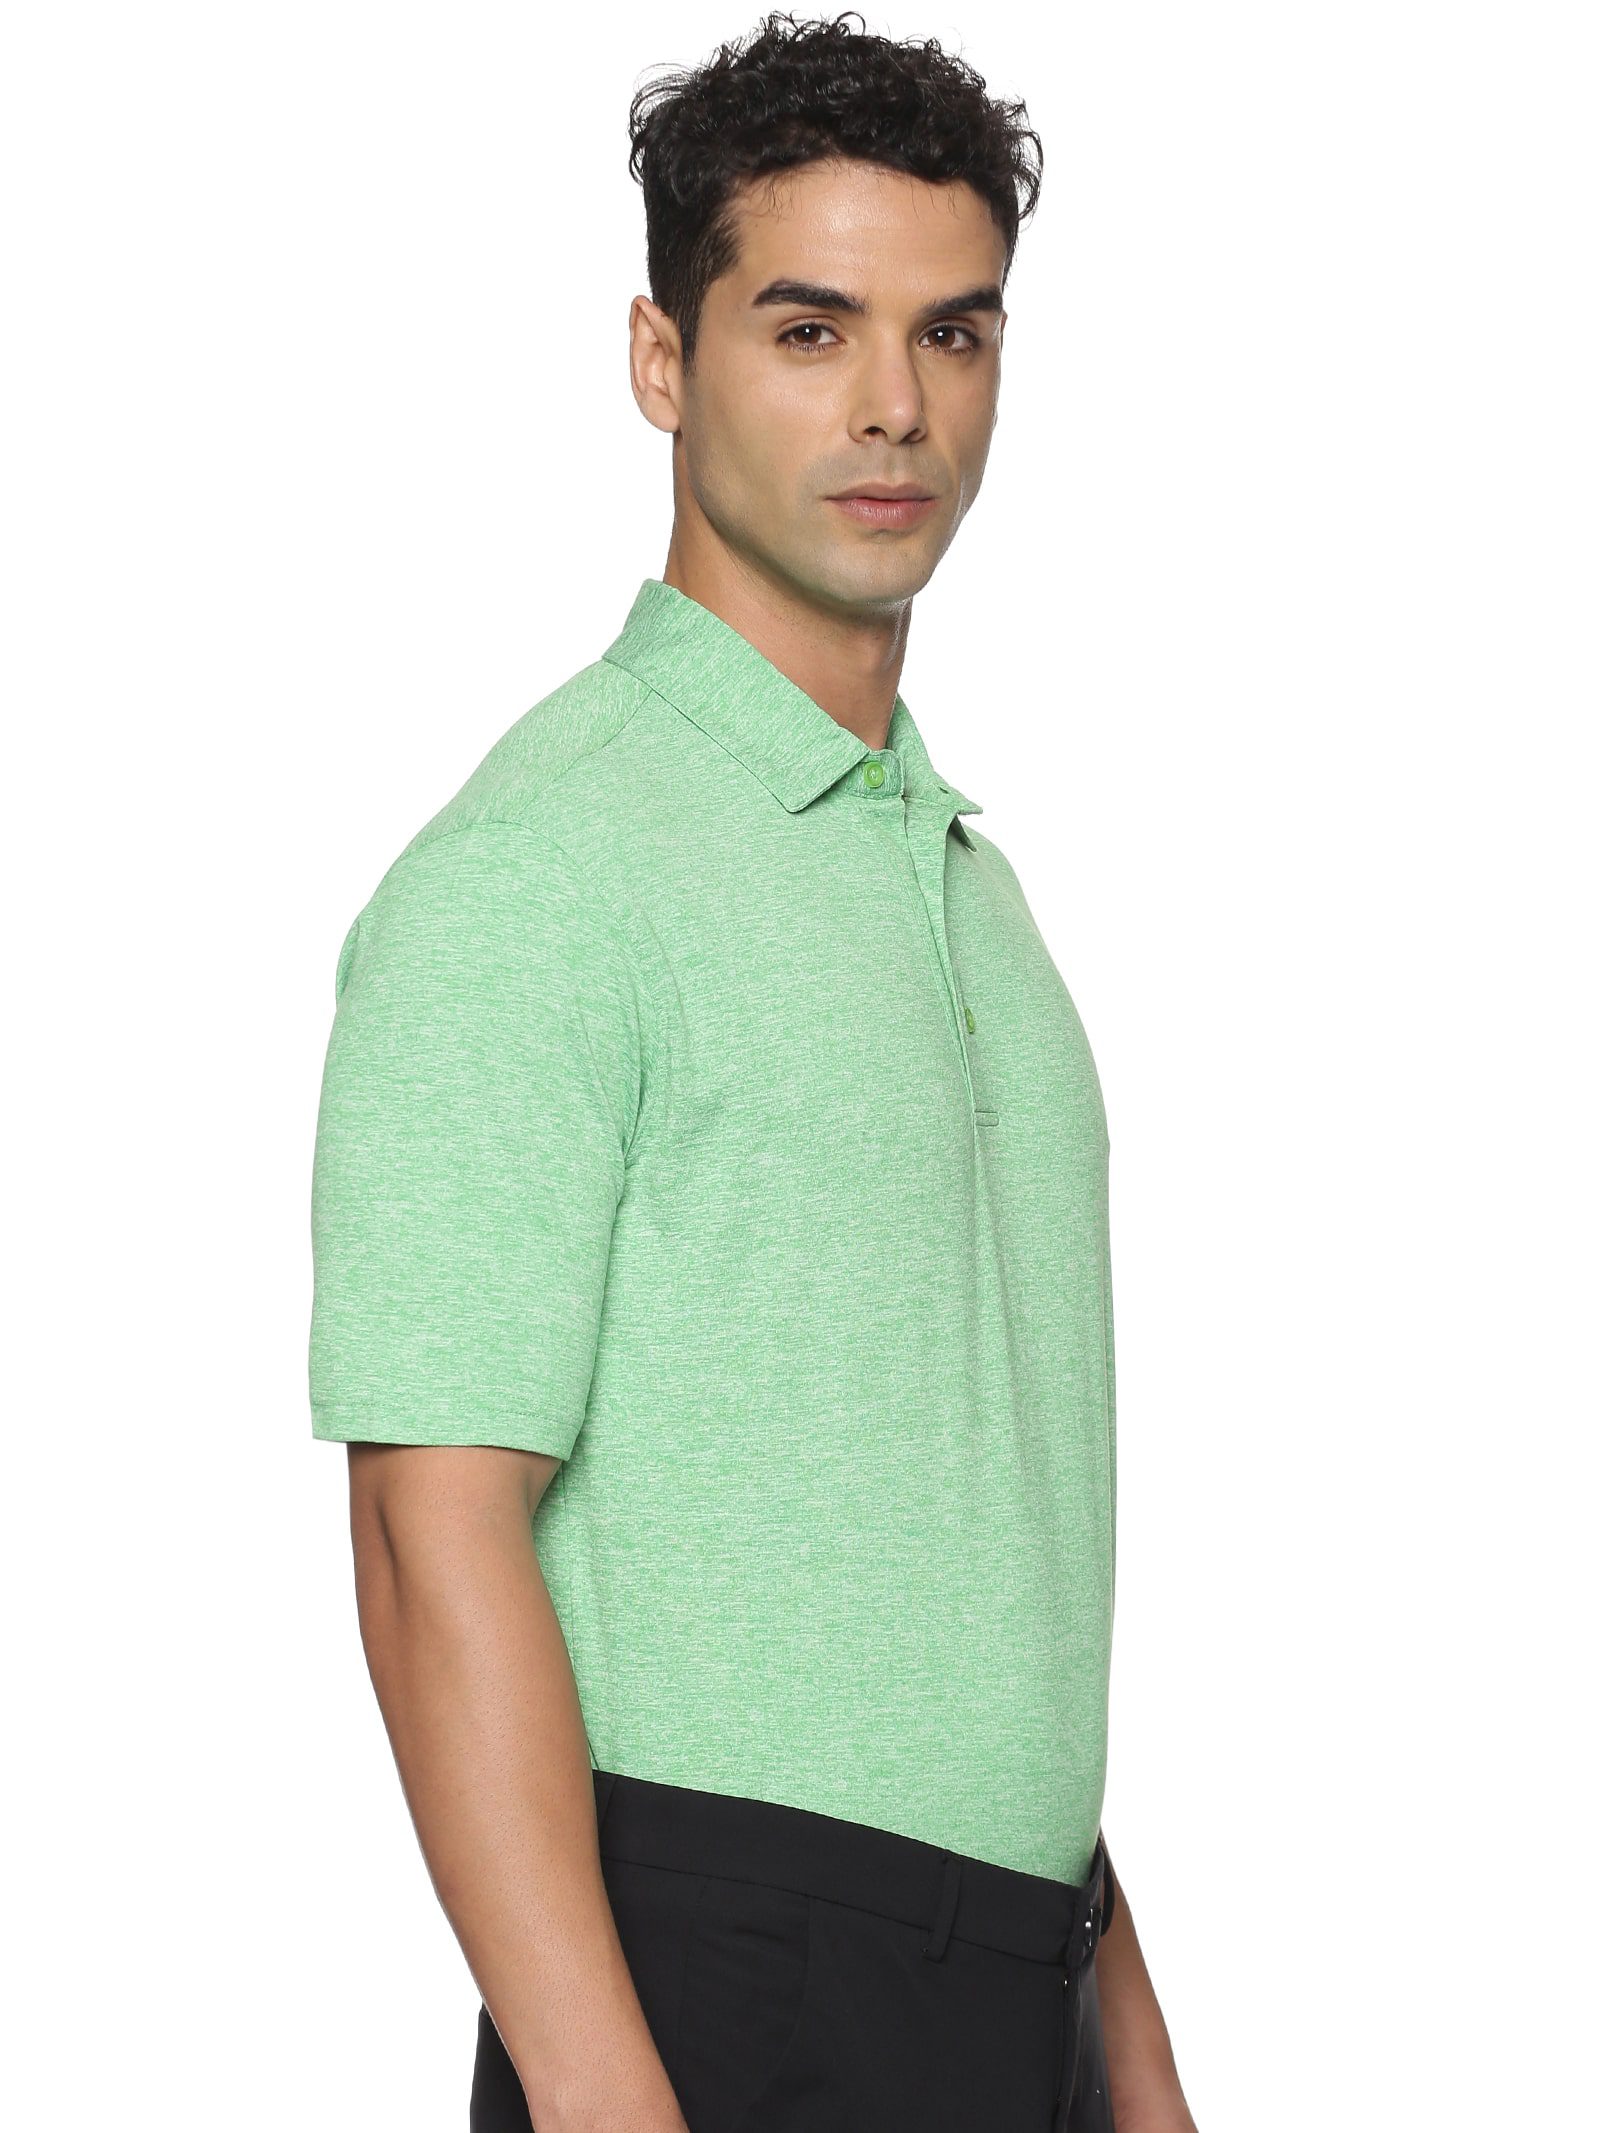 Buy Latest Golf Polo T-Shirts Online in India